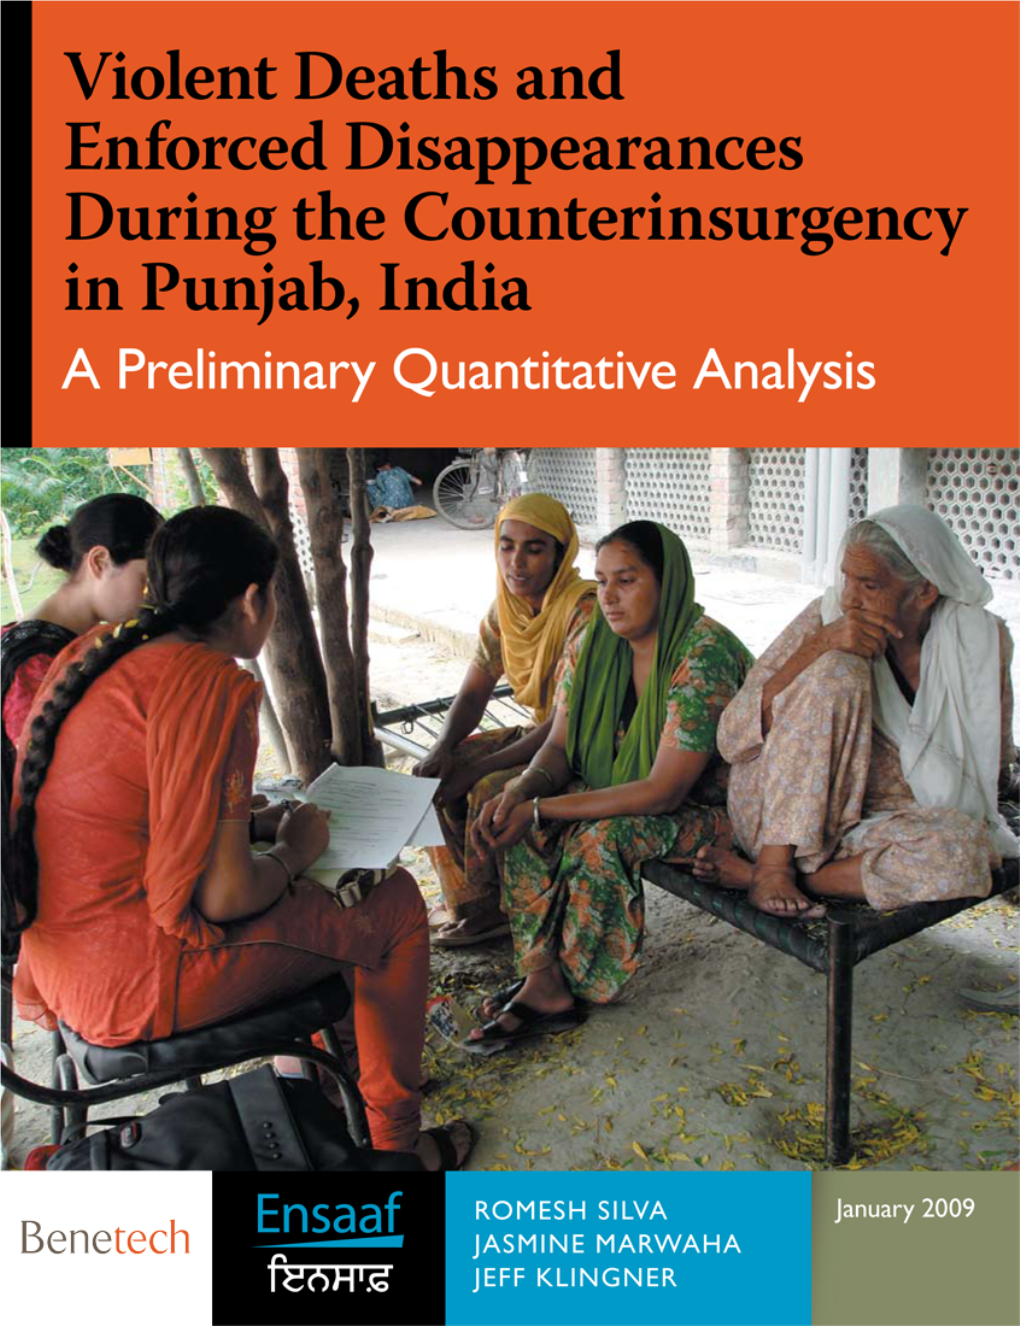 Violent Deaths and Enforced Disappearances During the Counterinsurgency in Punjab, India